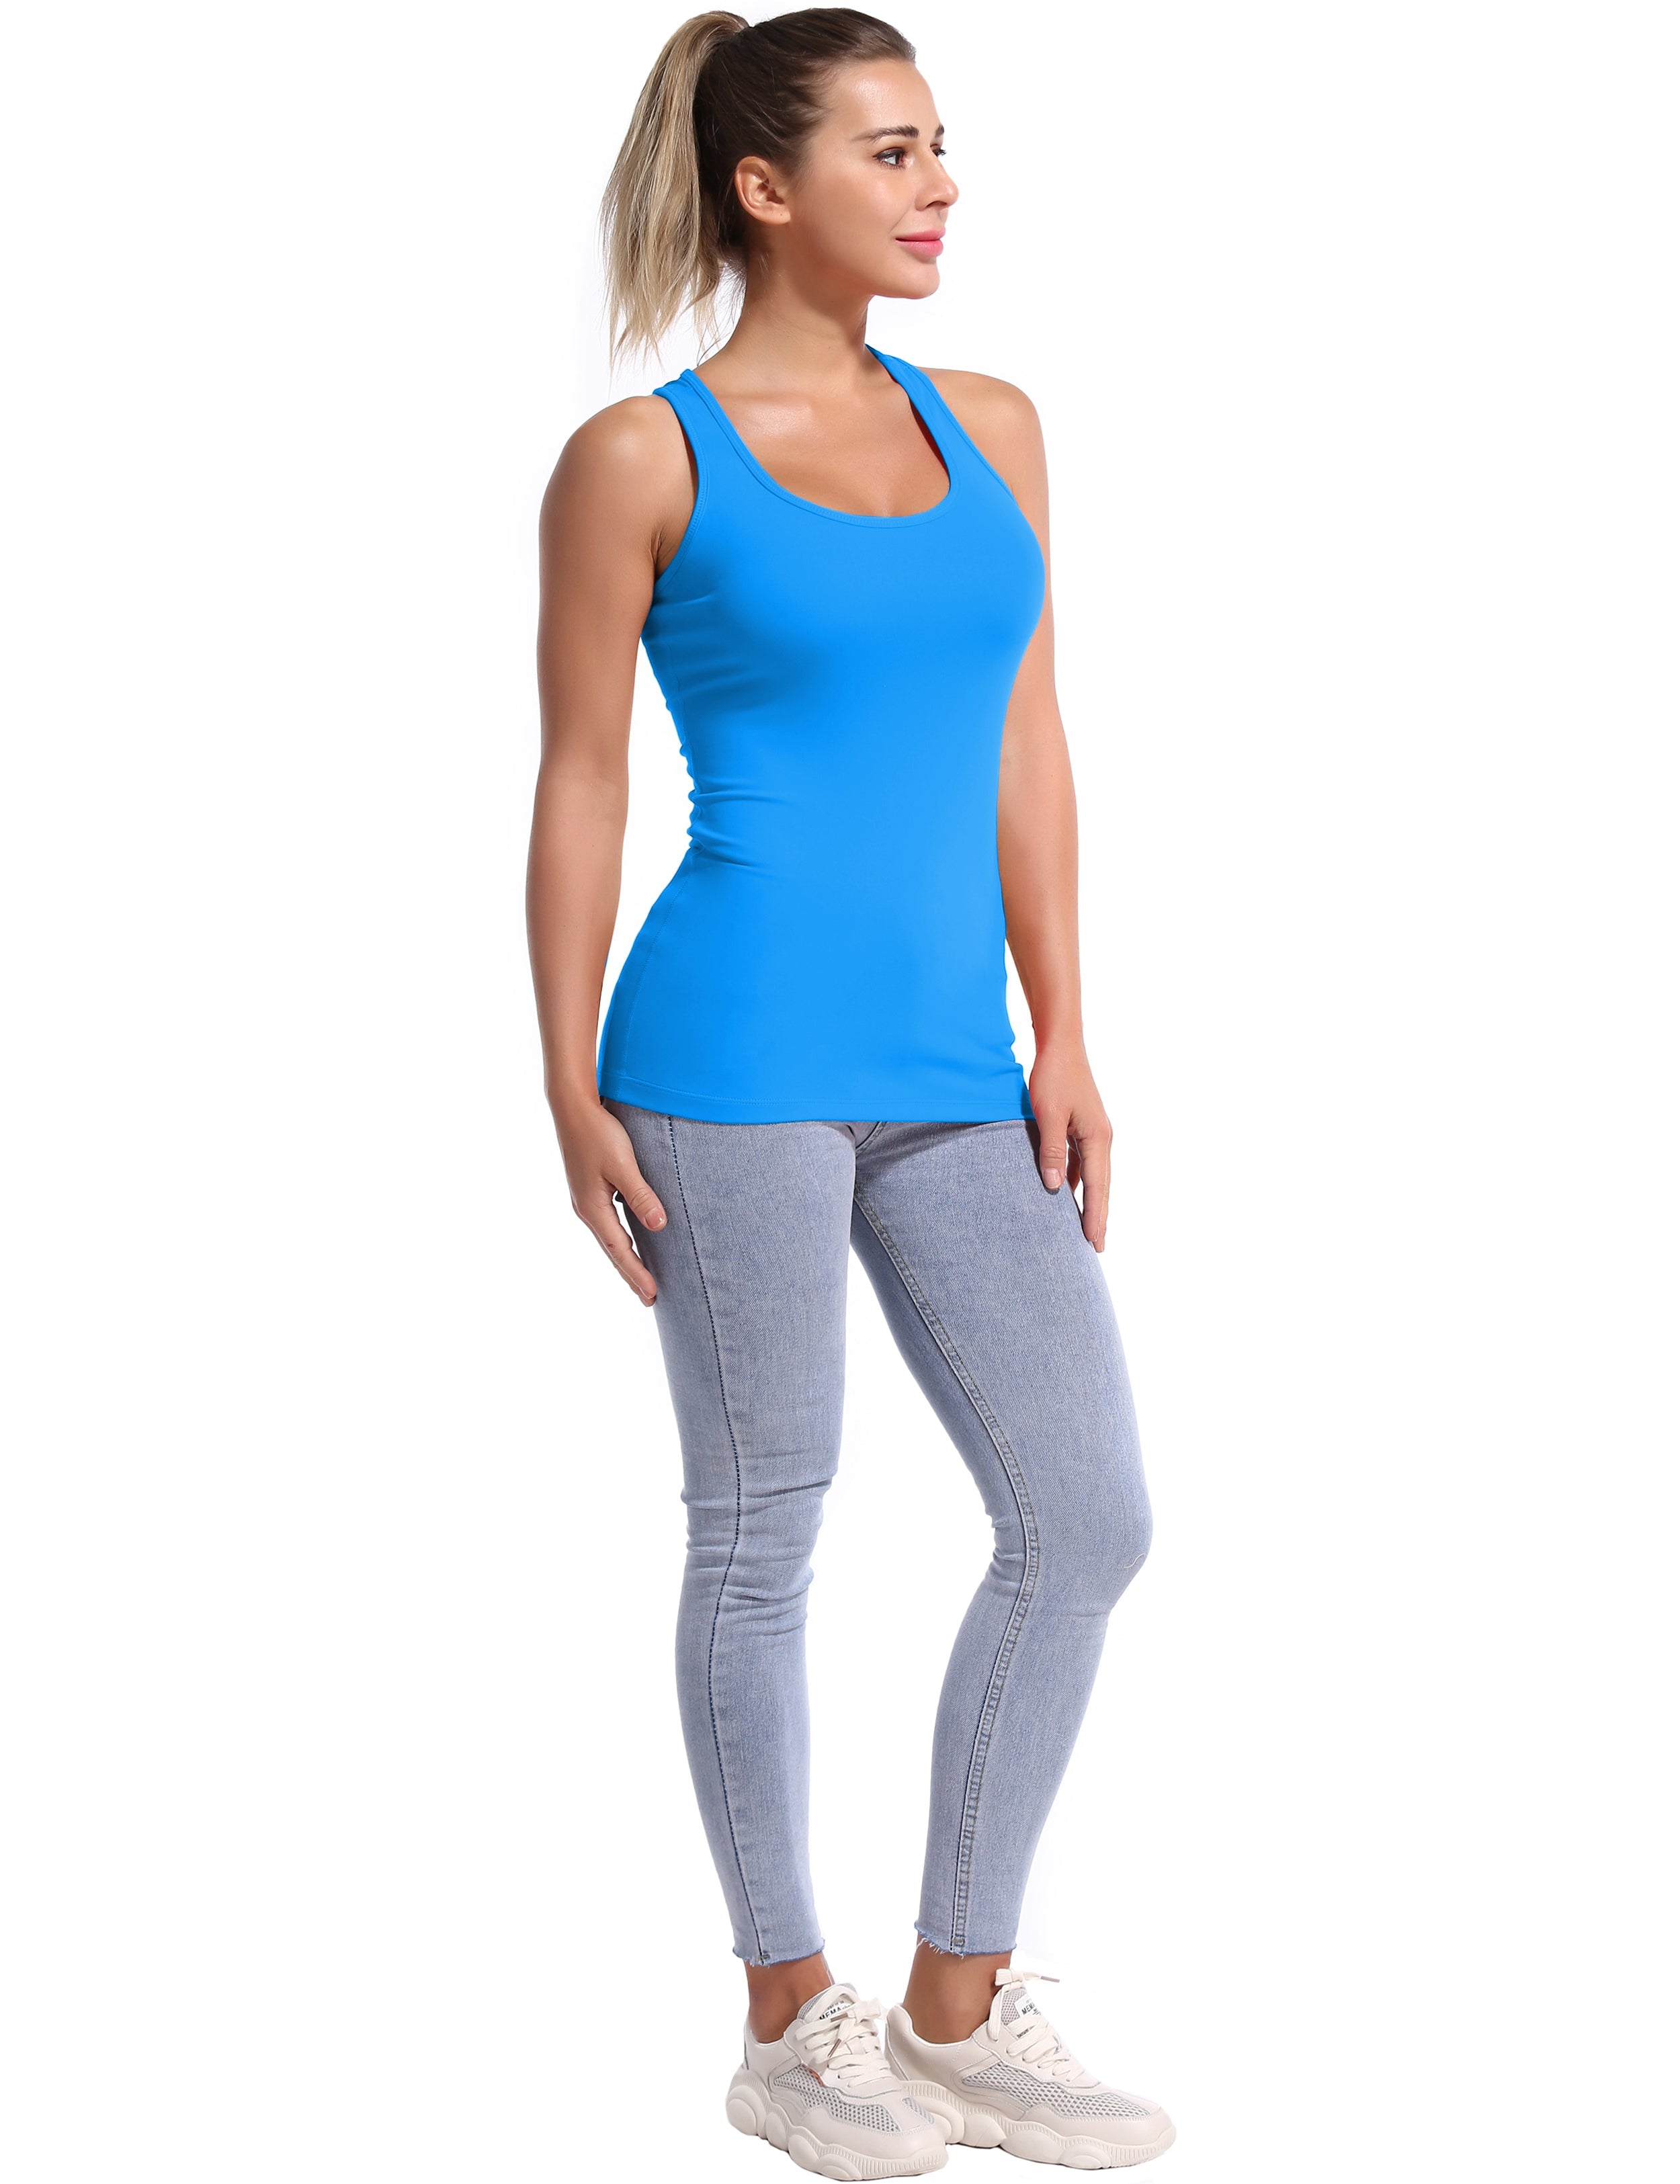 Racerback Athletic Tank Tops deepskyblue 92%Nylon/8%Spandex(Cotton Soft) Designed for Golf Tight Fit So buttery soft, it feels weightless Sweat-wicking Four-way stretch Breathable Contours your body Sits below the waistband for moderate, everyday coverage